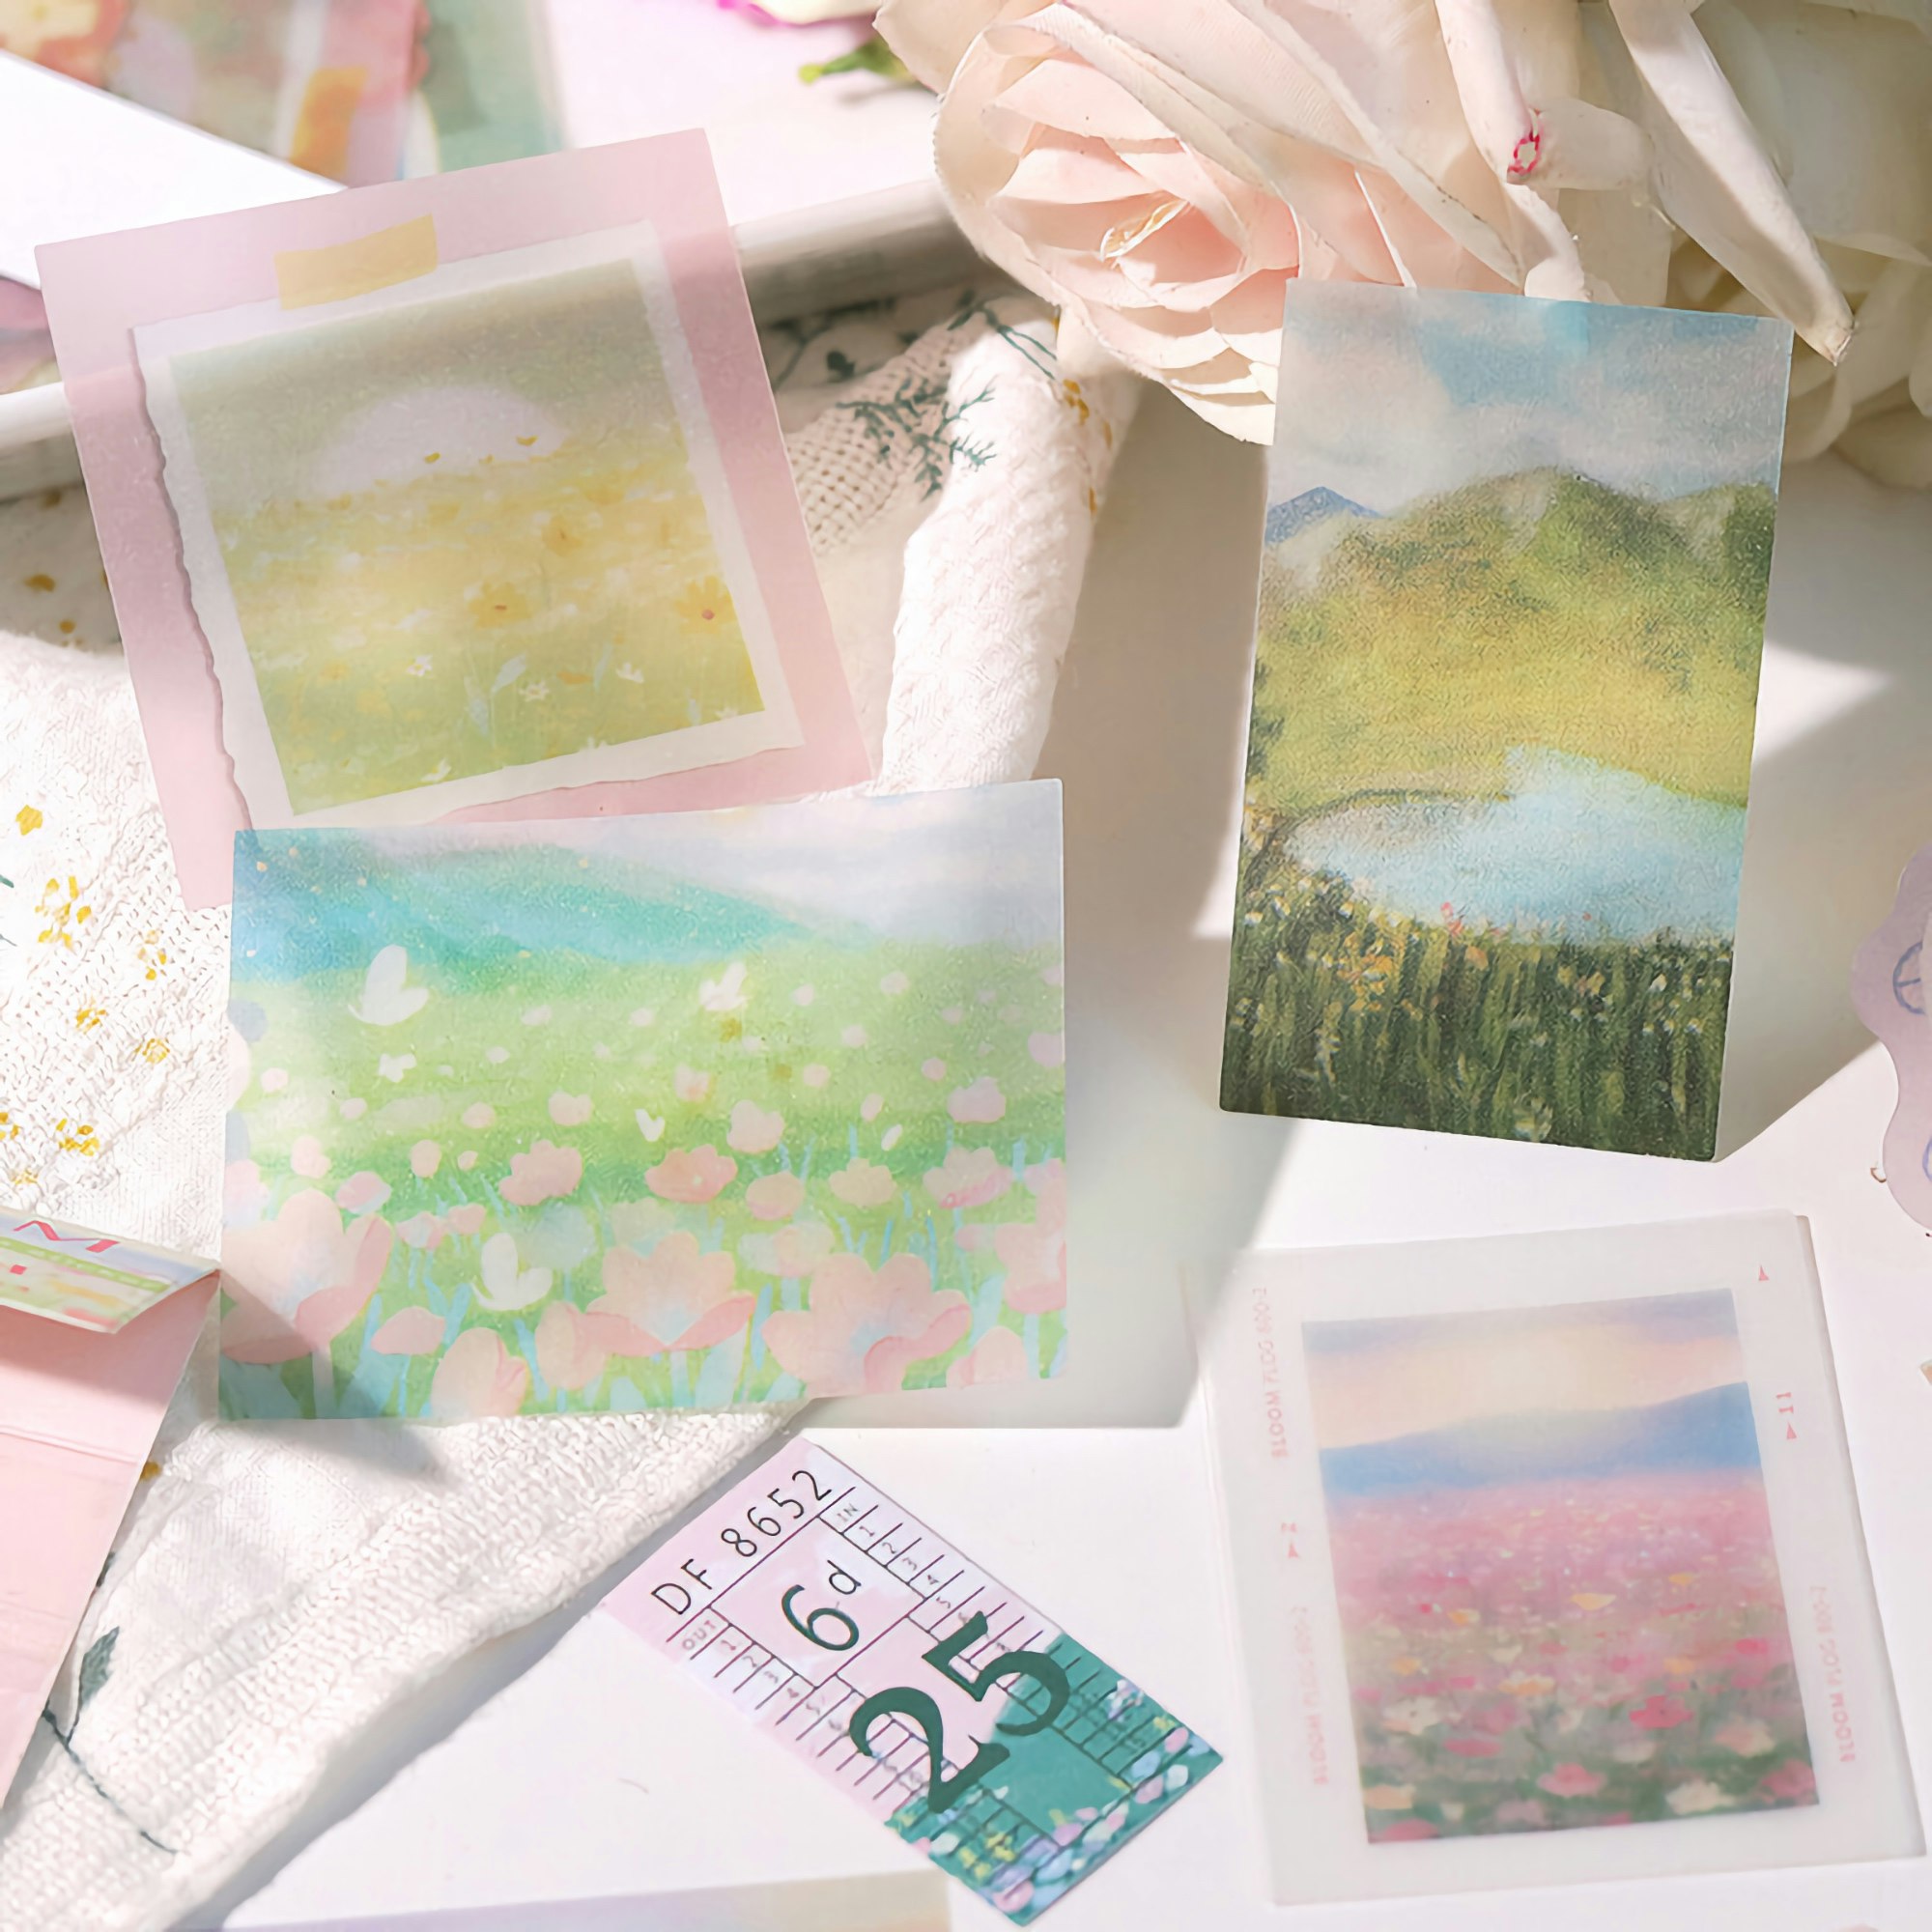 BGM Flake Stickers Travel Diary / Flower Field Tracing Paper